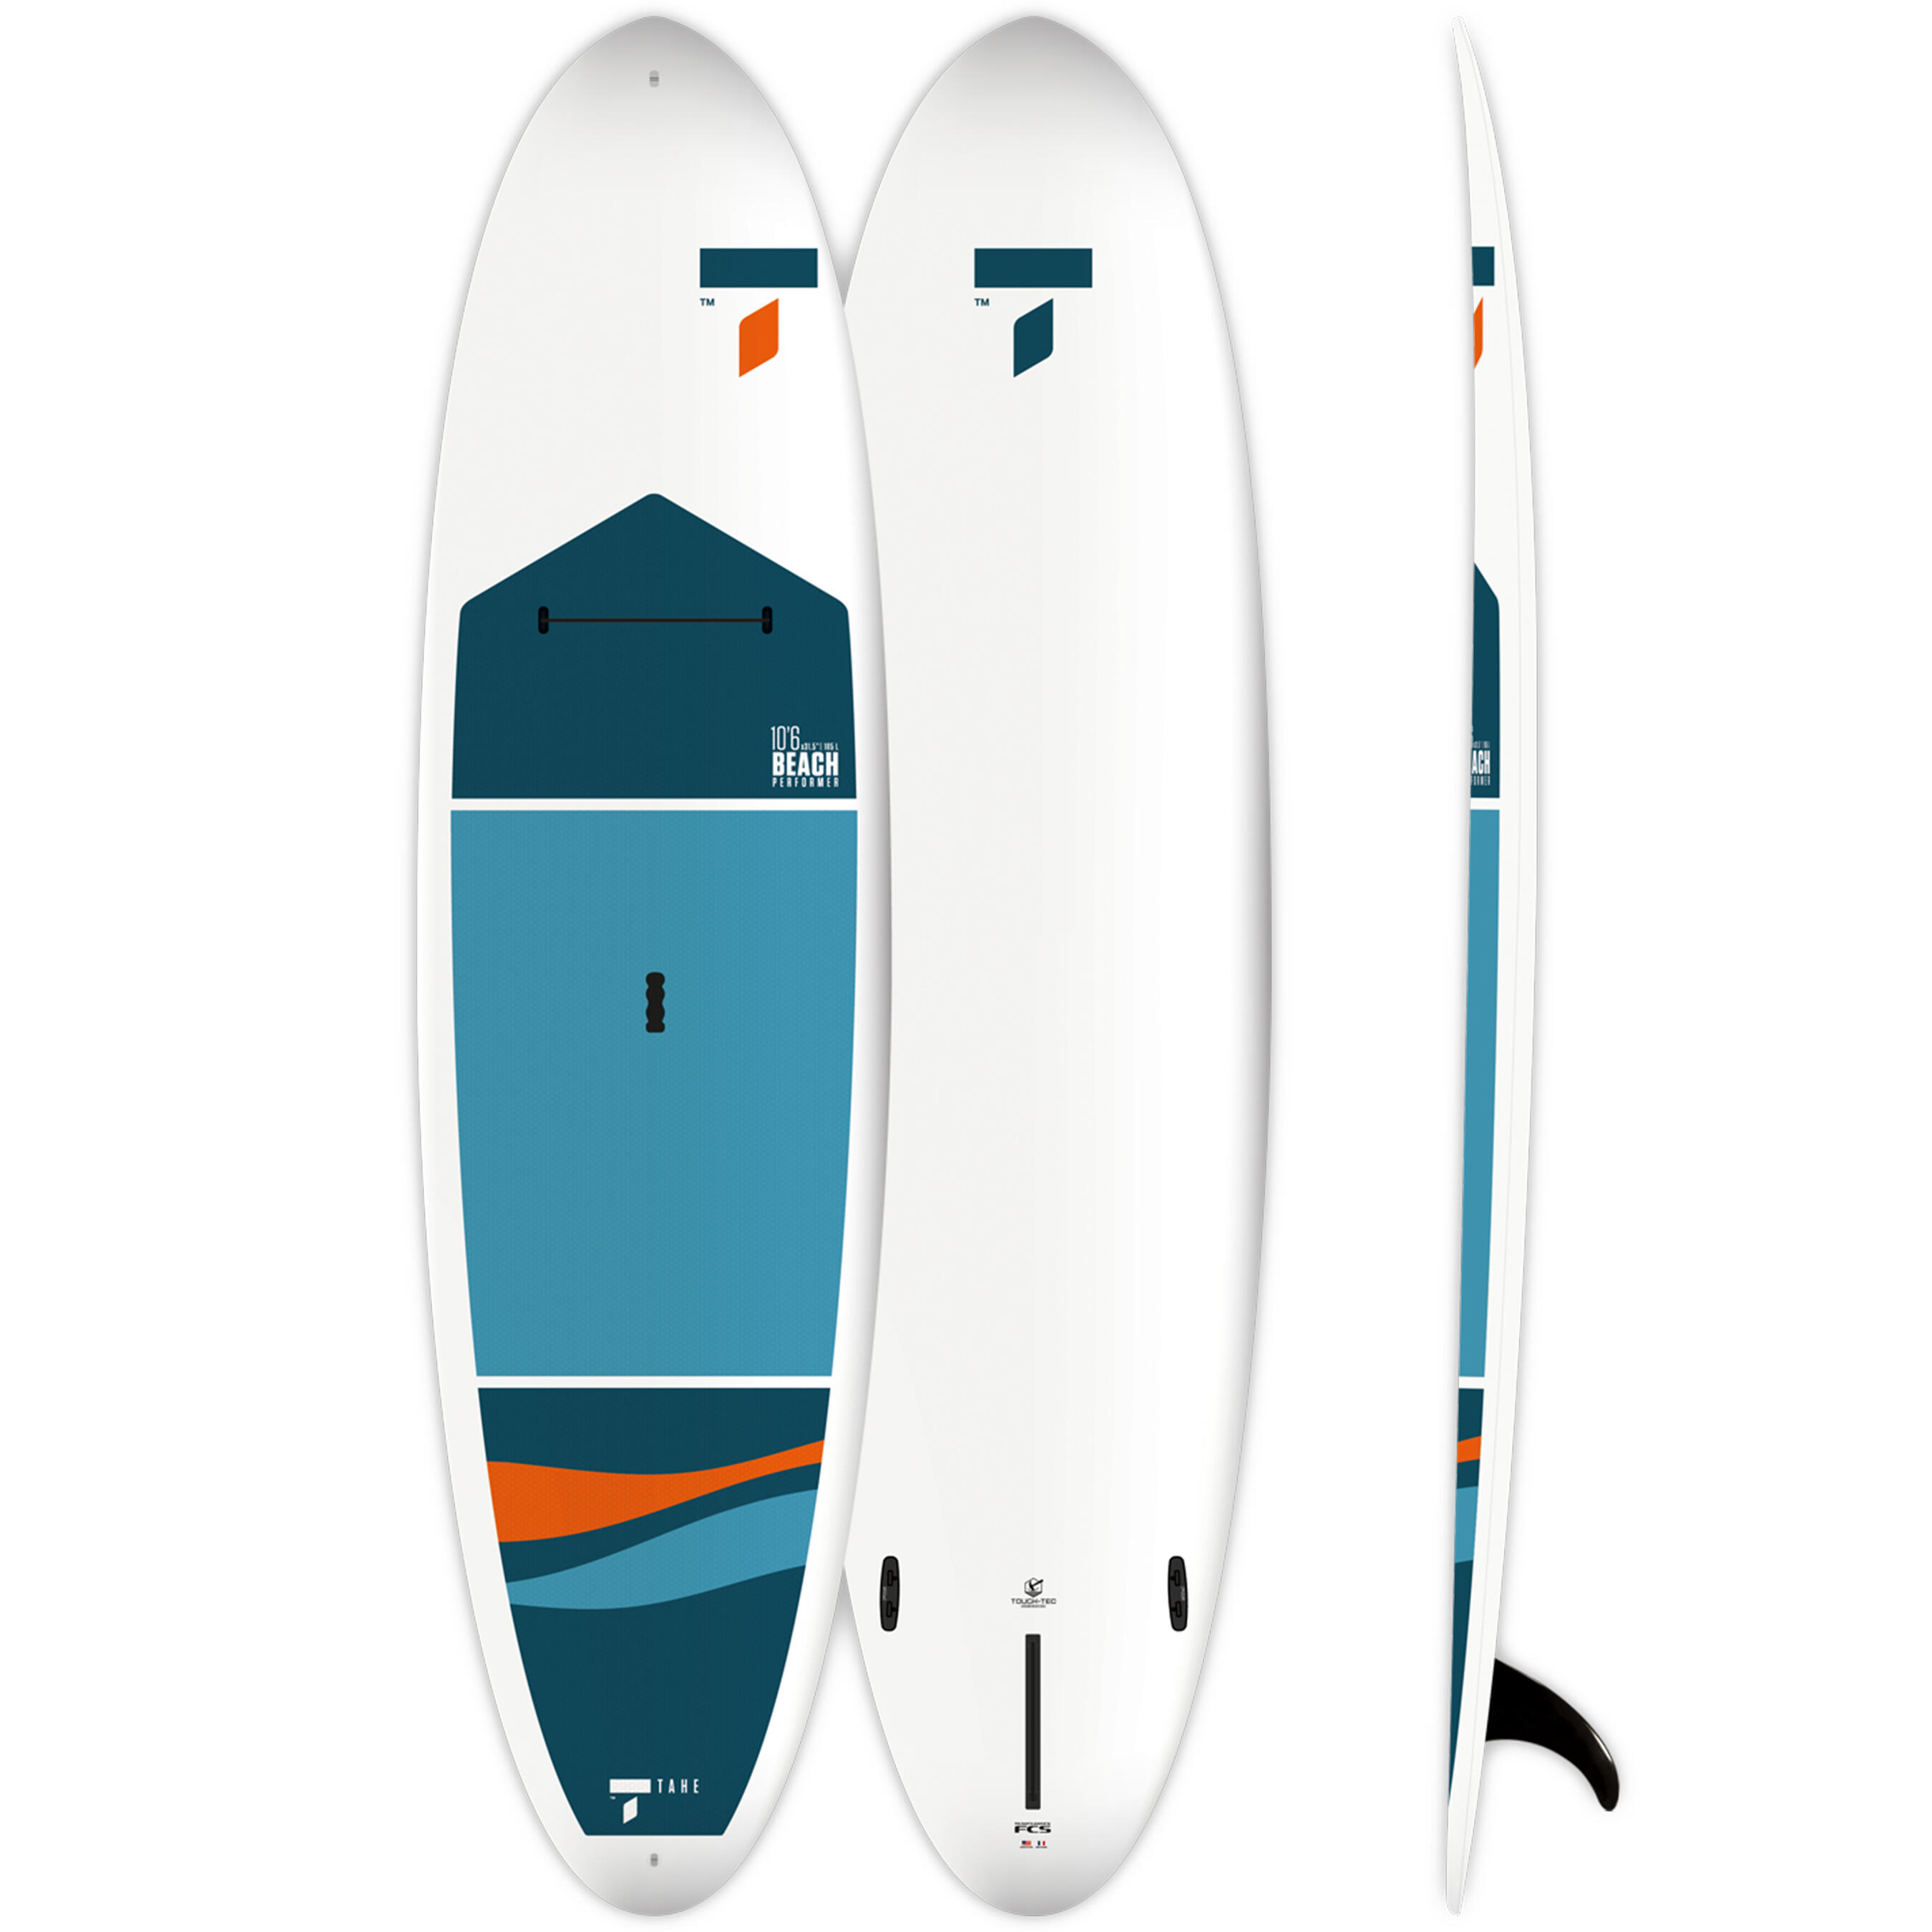 TAHE OUTDOORS SUP-Board Stand Up Paddle Hardboard Tahe Outdoor Beach Performer 10'6 185 L EINHEITSGRÖSSE